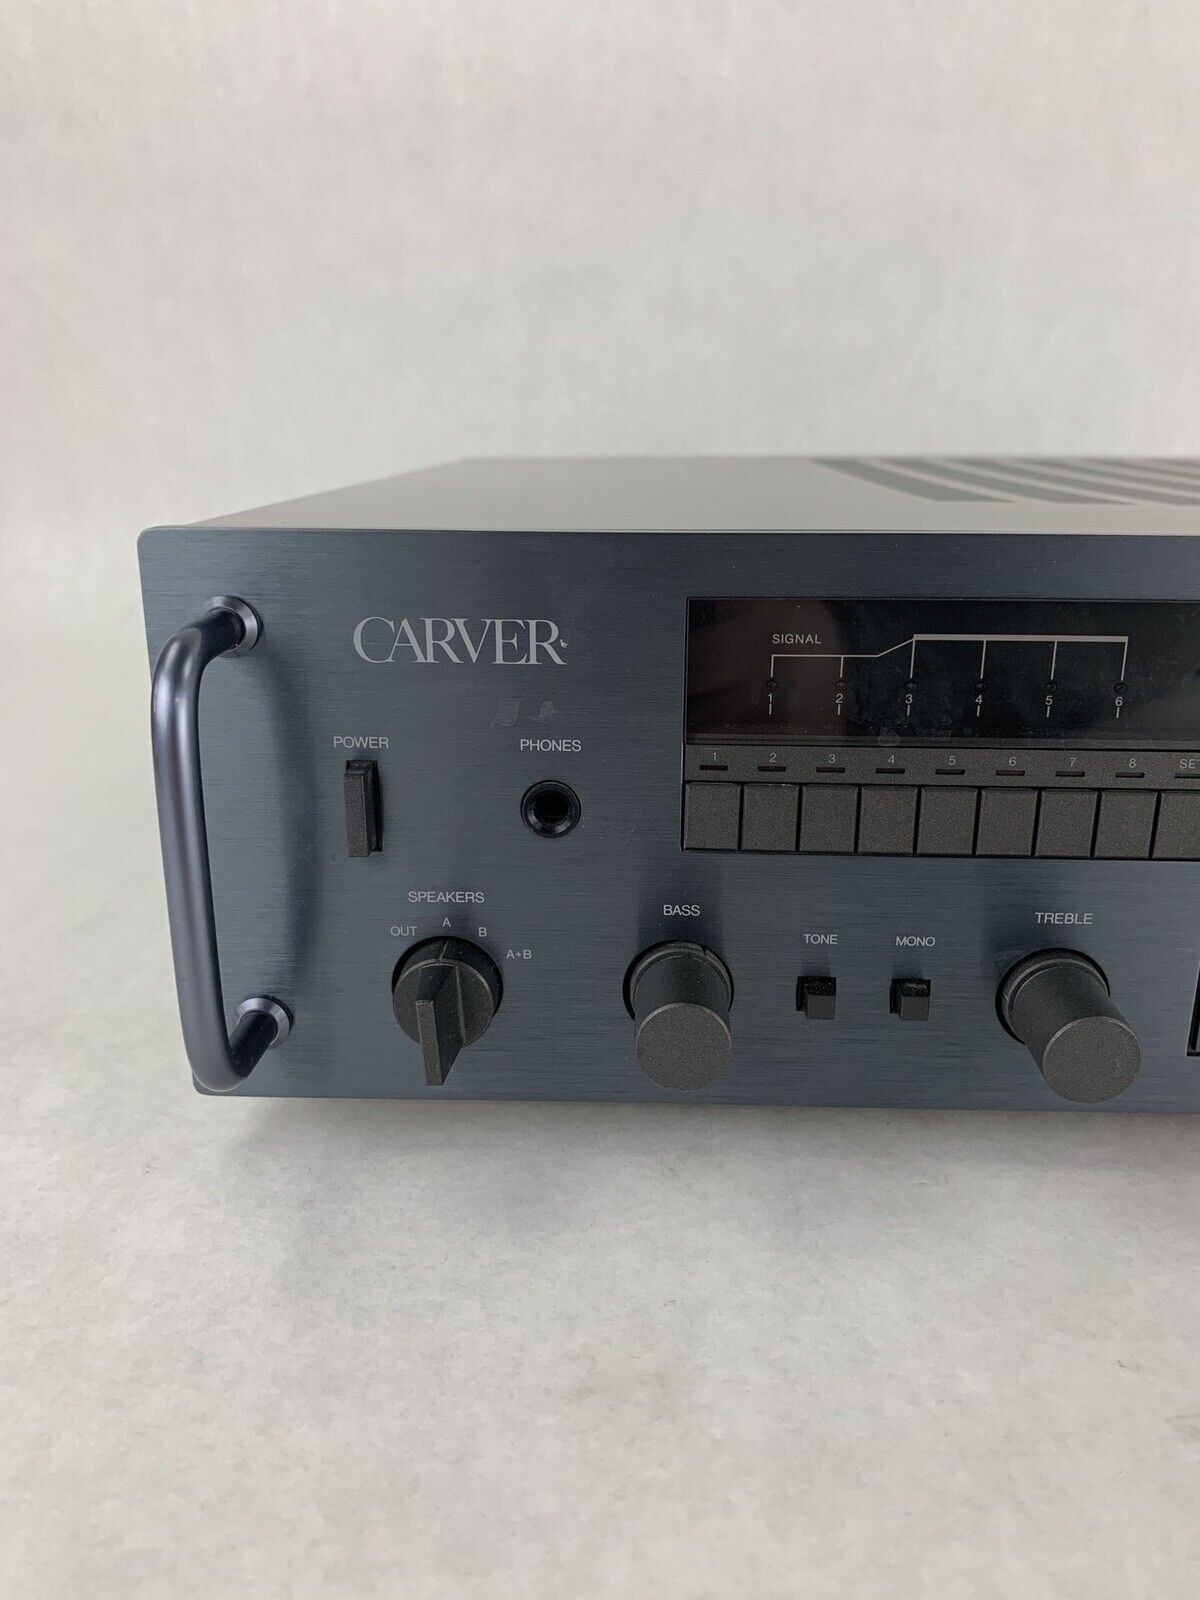 Vintage The Carver Receiver 900 Magnetic Field Power Stereo Tested For Parts